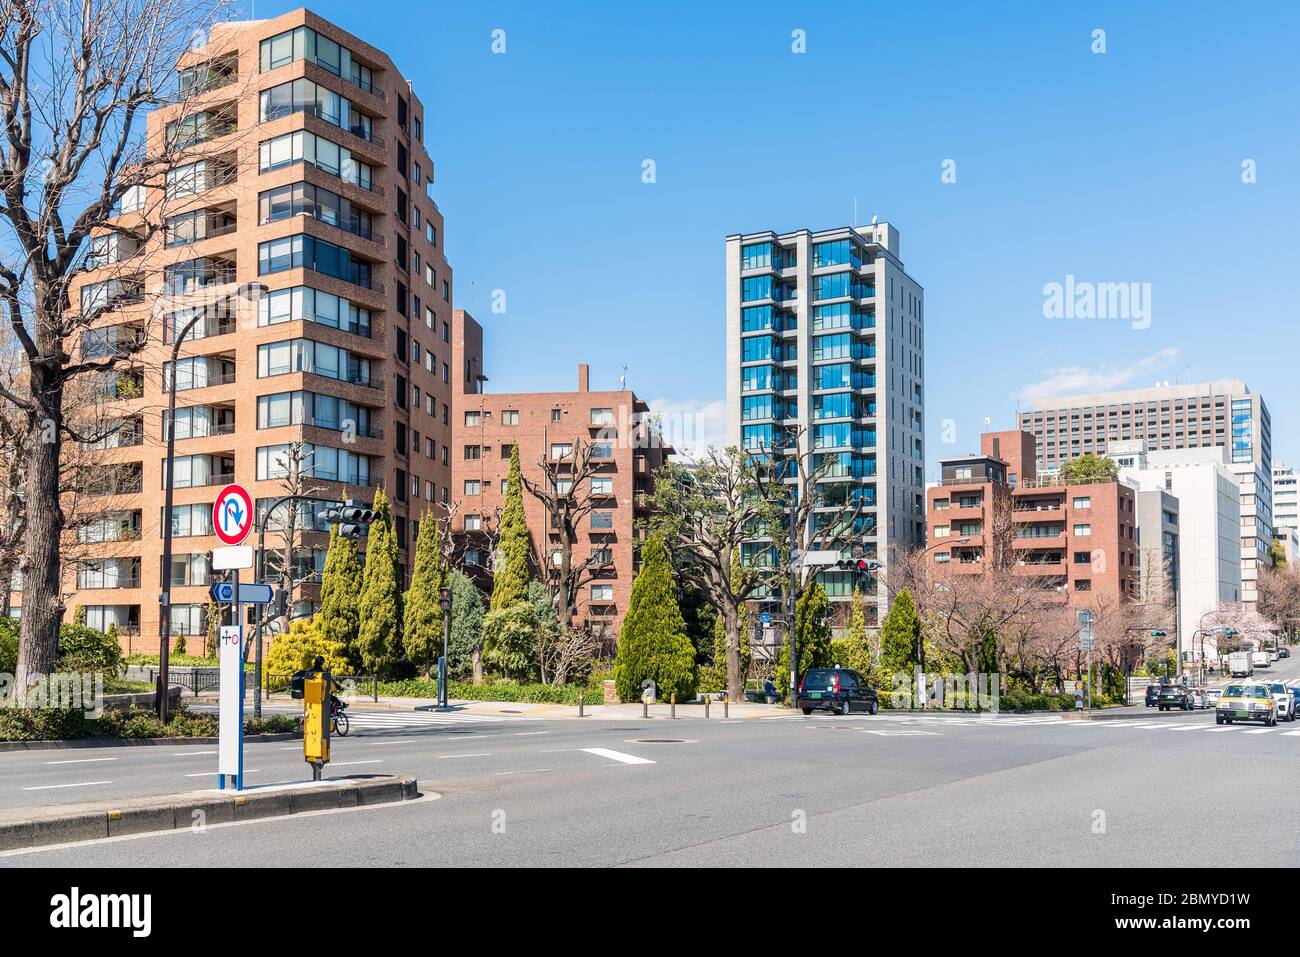 Apartment buildings in a residential district in Tokyio on a clear early spring day. An intersection with traffic lights is in foreground. Stock Photo